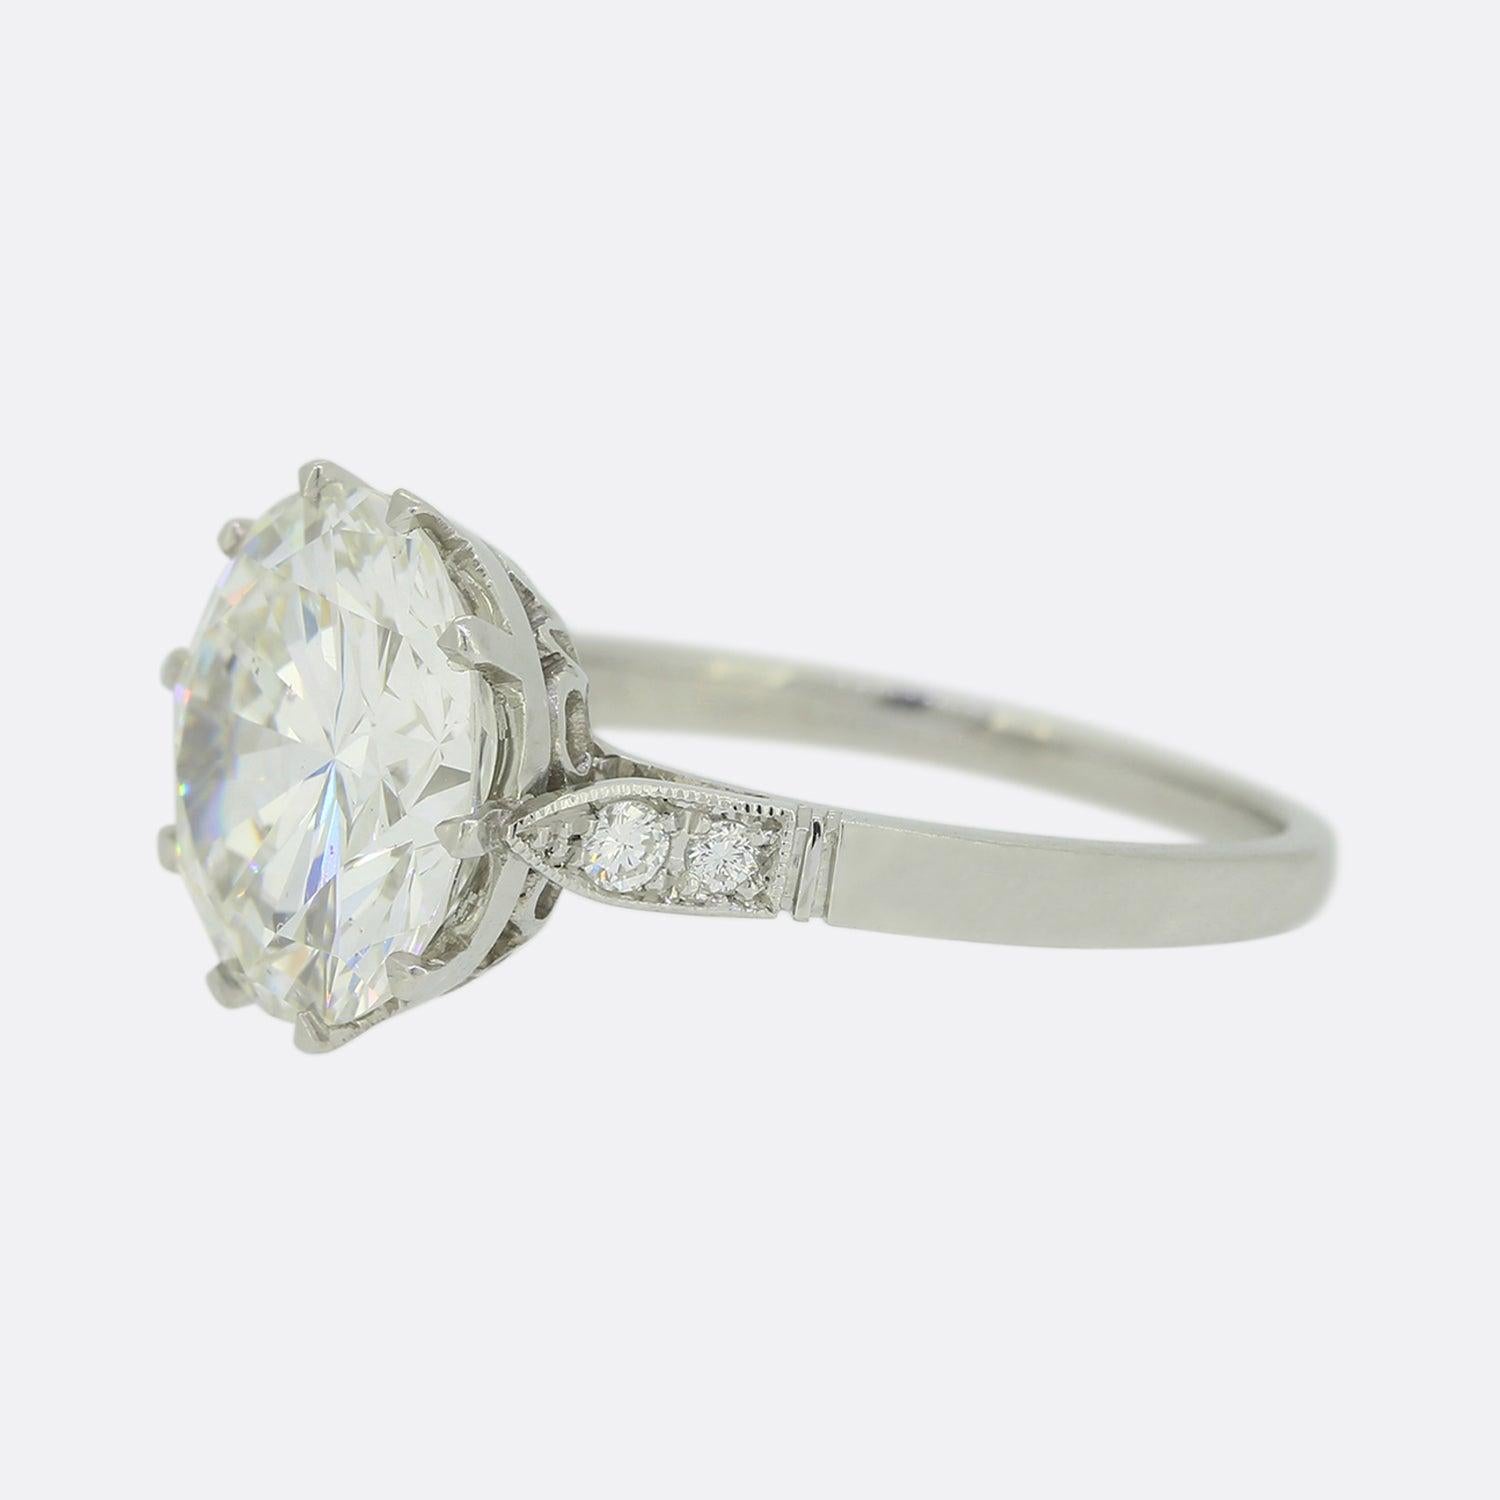 This is a platinum diamond solitaire engagement ring. The ring features a centralised 4.02 carat round transitional cut diamond. 

Condition: Used (Excellent)
Weight: 4.0 grams
Ring Size: L 1/2
Central Diamond Details: Weight: 4.02 carats, Colour: